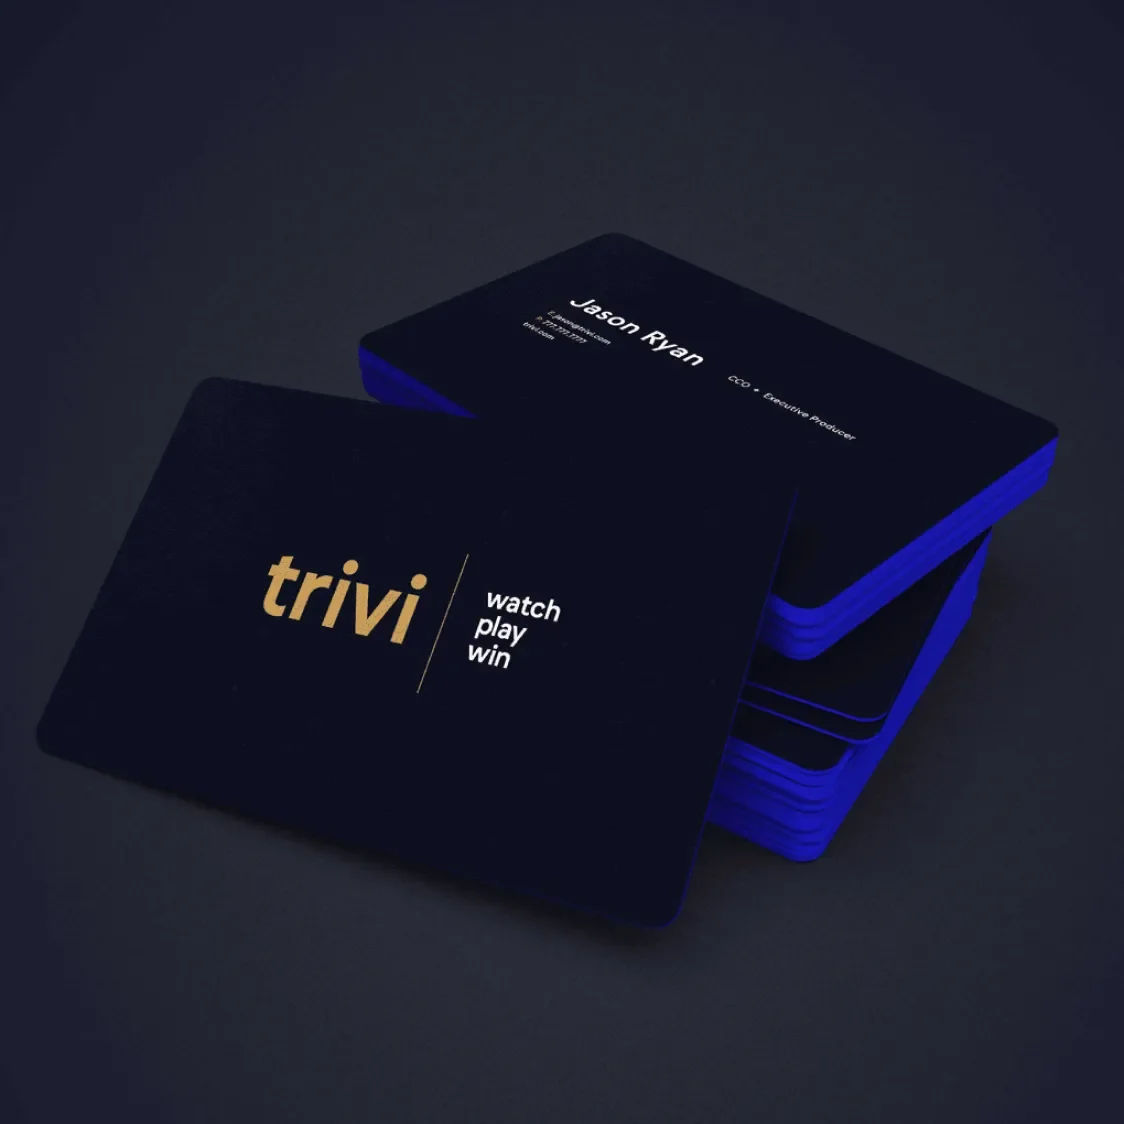 Trivi's business cards in a stack